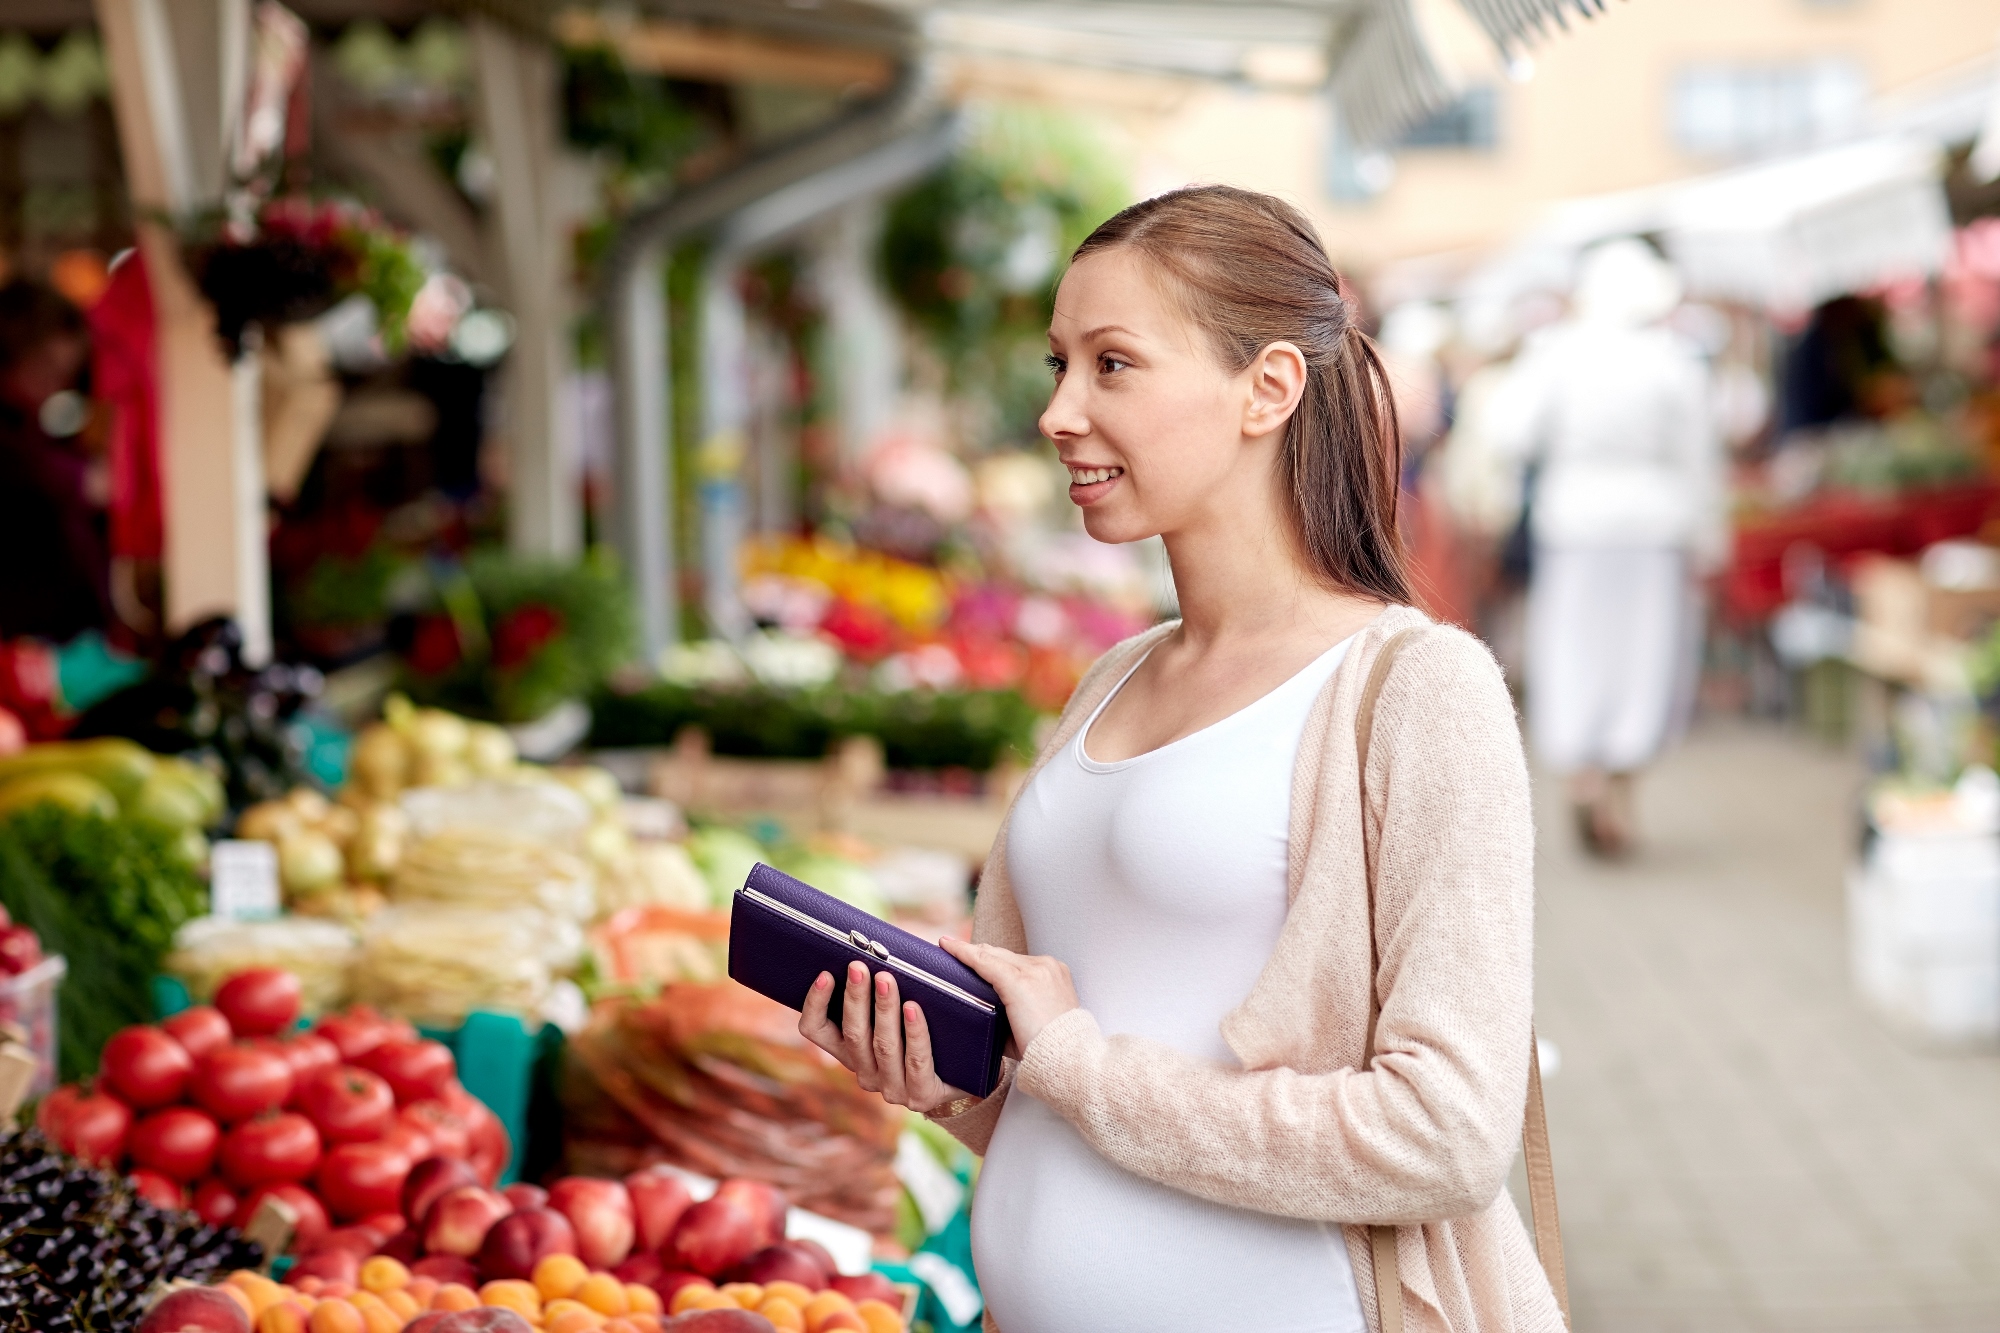 11 Must Foods To Eat While Pregnant